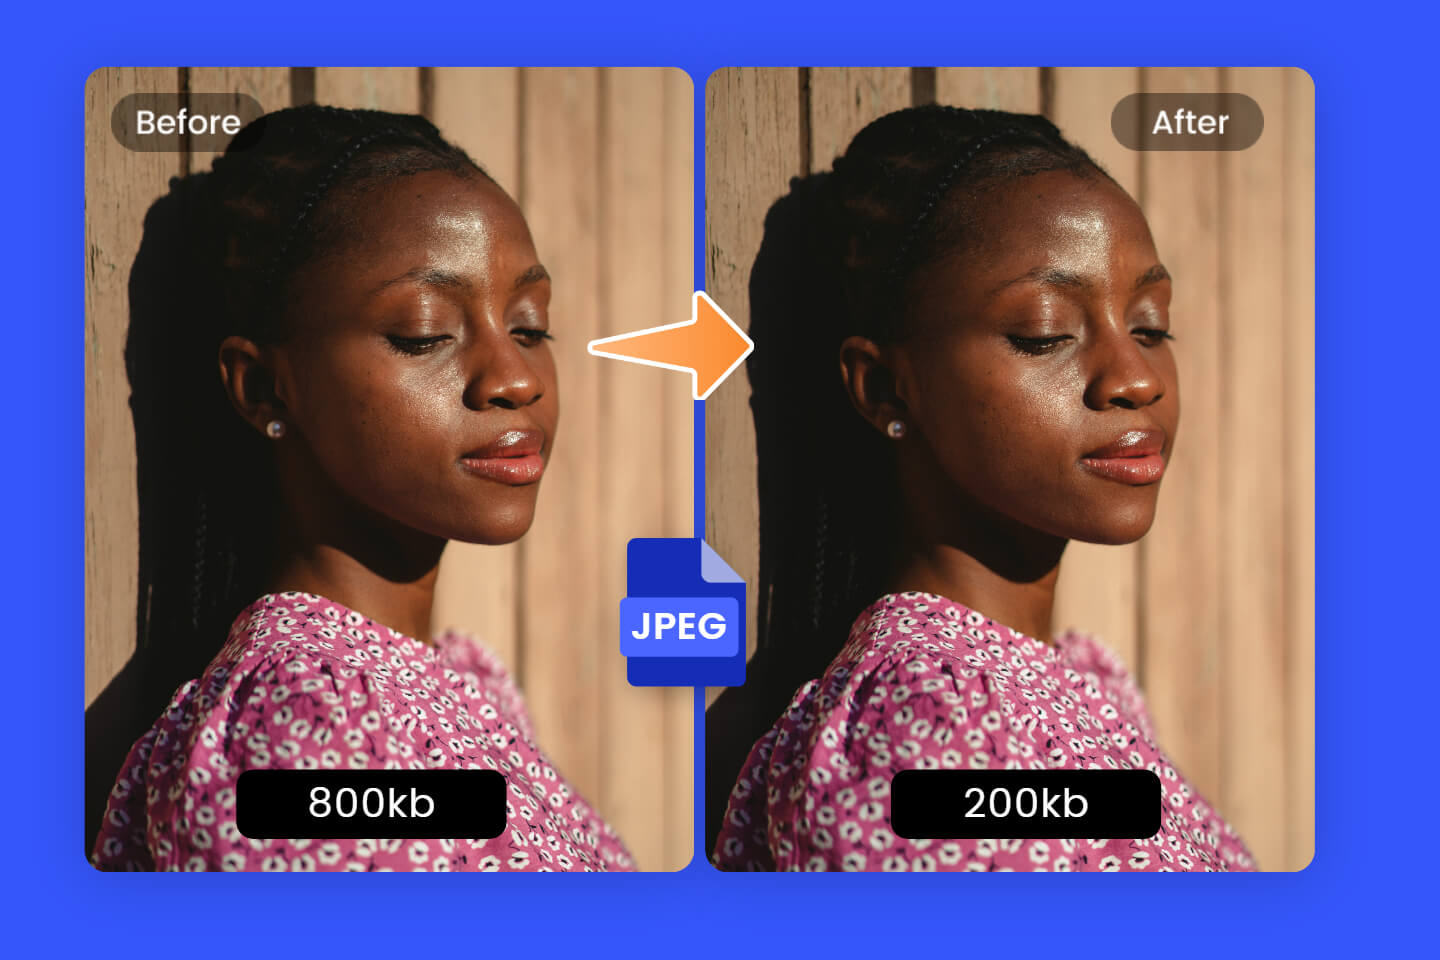 Compress JPEG image size from 800kb to 200kb